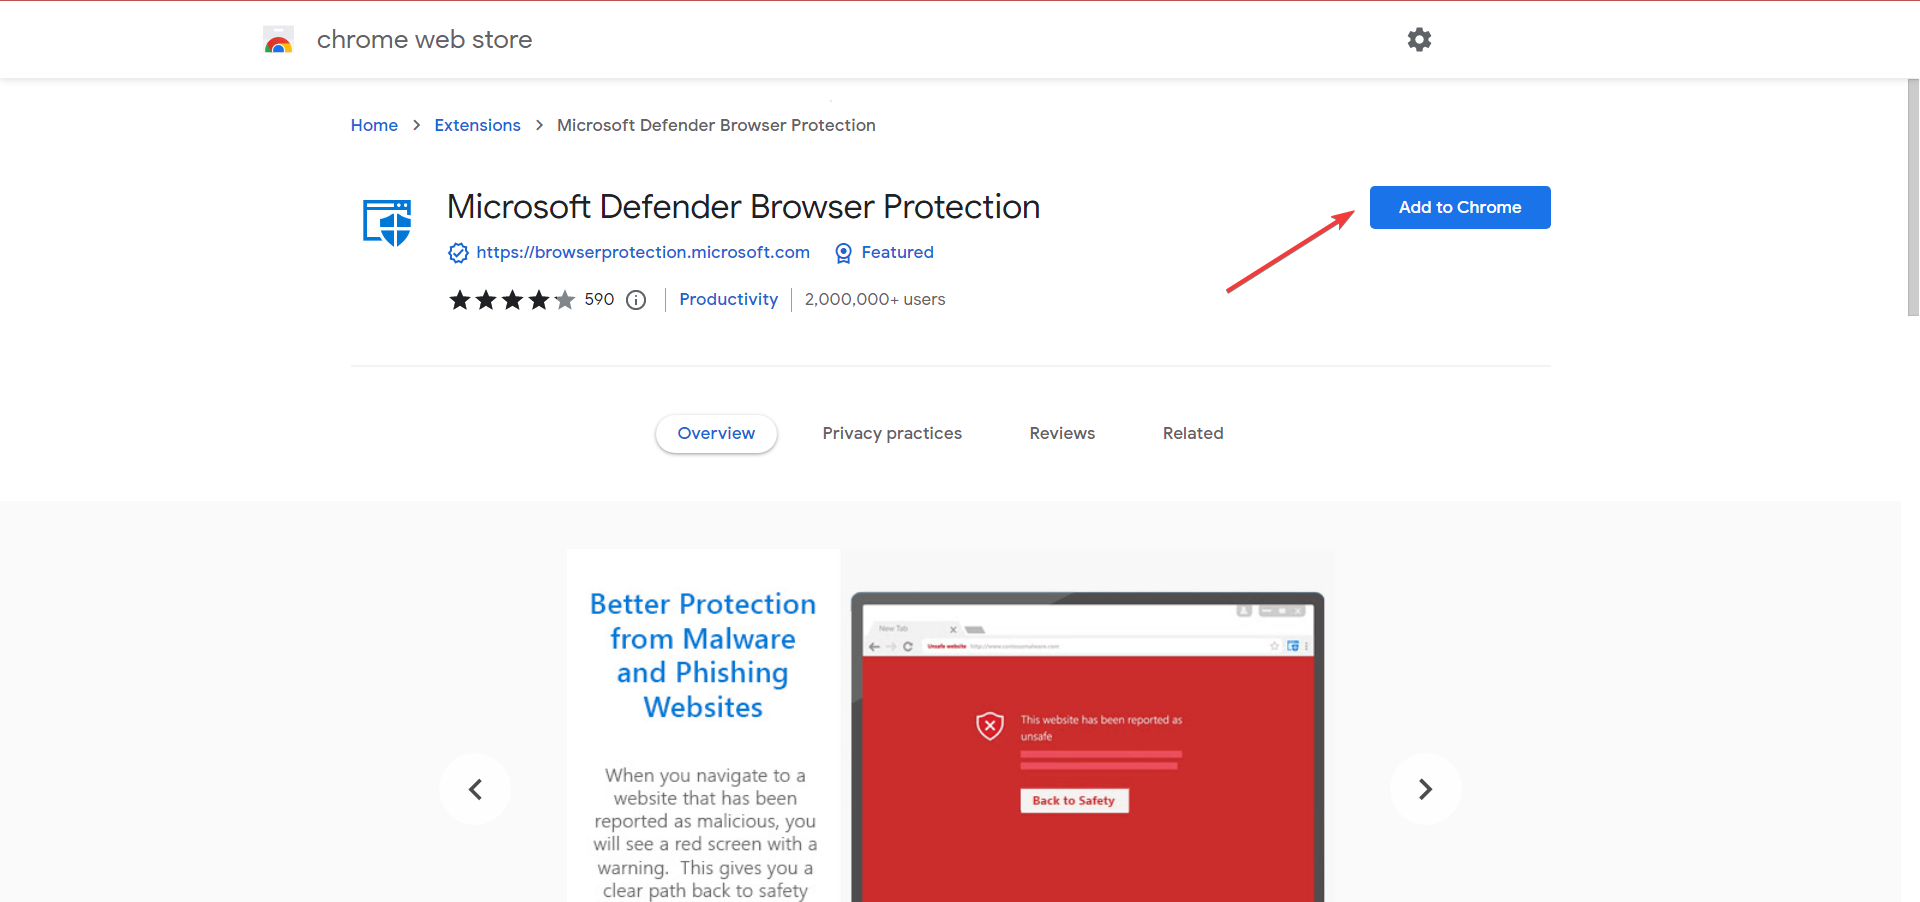 Add to Chrome to get windows defender browser protection